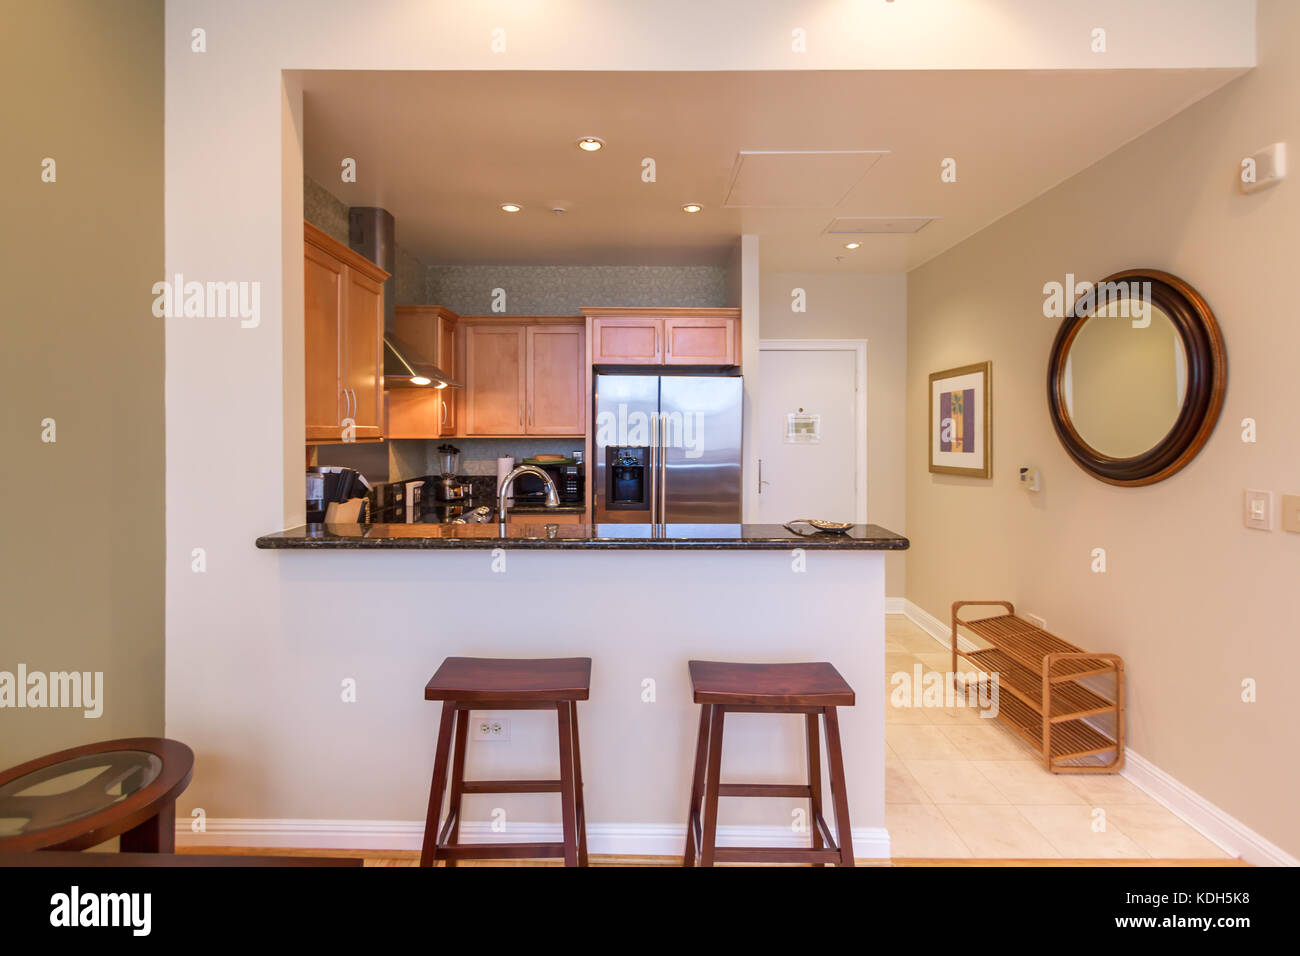 Dinning area with view into the kitchen of a hotel/condo rental Stock Photo